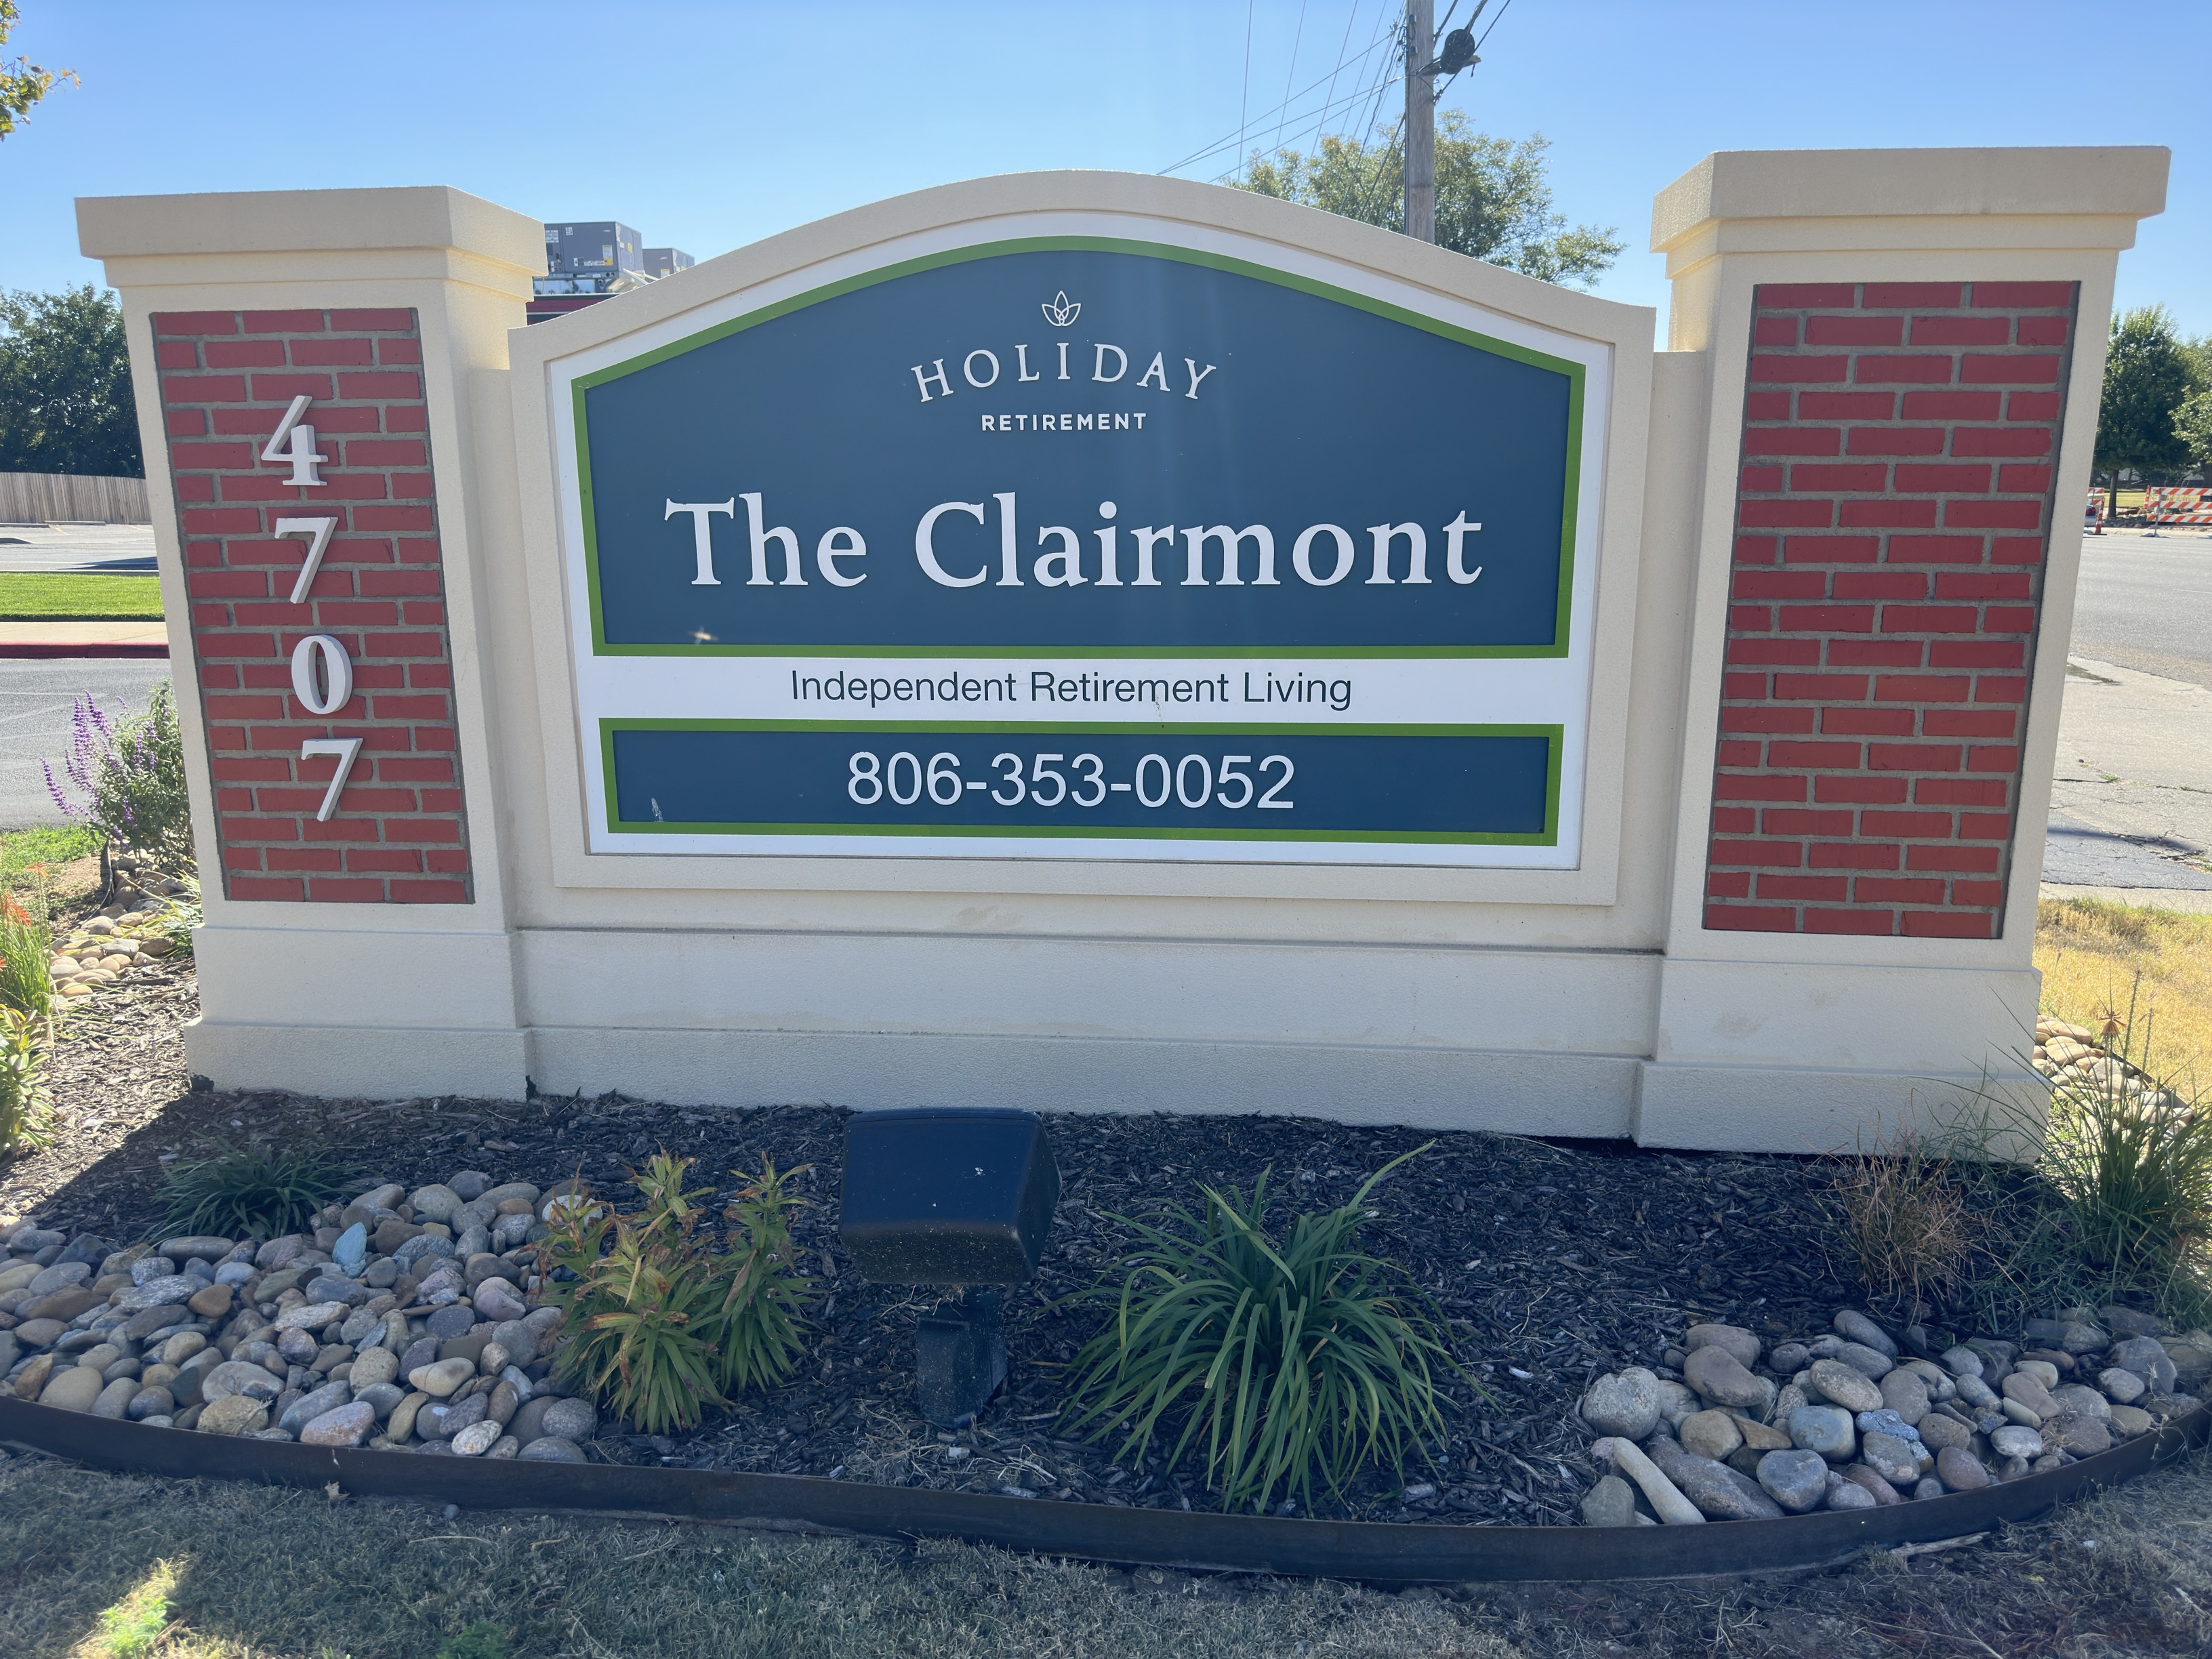 Holiday The Clairmont